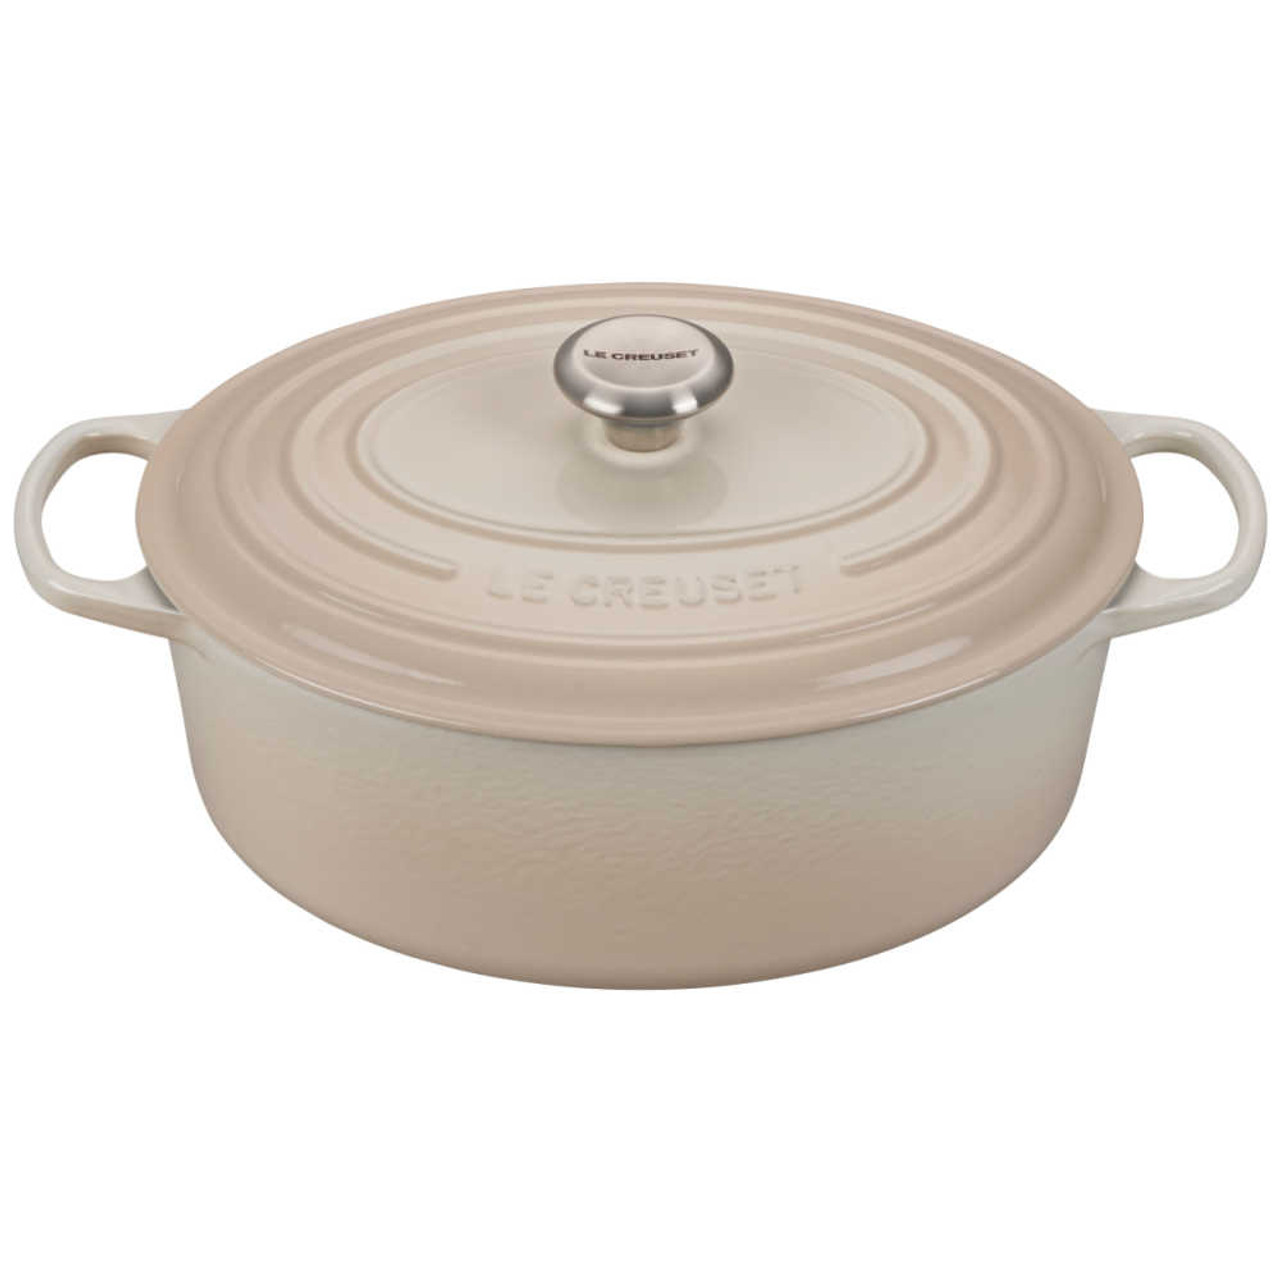 https://cdn11.bigcommerce.com/s-hccytny0od/images/stencil/1280x1280/products/2466/17565/Le_Creuset_Oval_Dutch_Oven_Meringue__32982.1639706783.jpg?c=2?imbypass=on